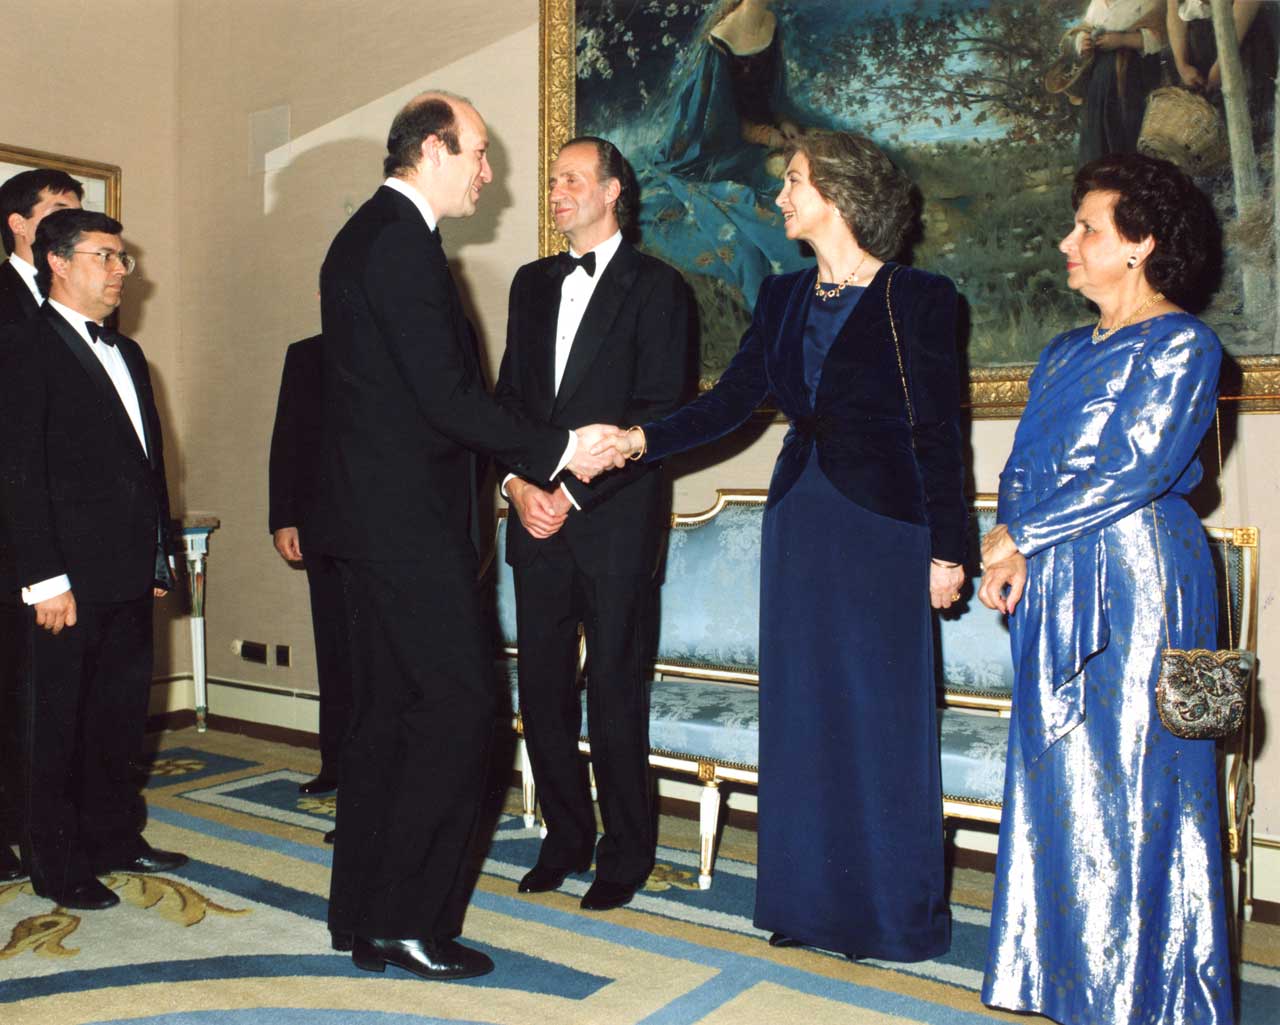 Their Majesties King Juan Carlos I and Queen Sofia welcome Michael Falter to the Pardo Palace in Madrid   Image © Copyright<small>For use visit: <a href="https://www.facsimile-editions.com/copyright/">Copyright T&C Facsimile Editions Ltd</a></small>